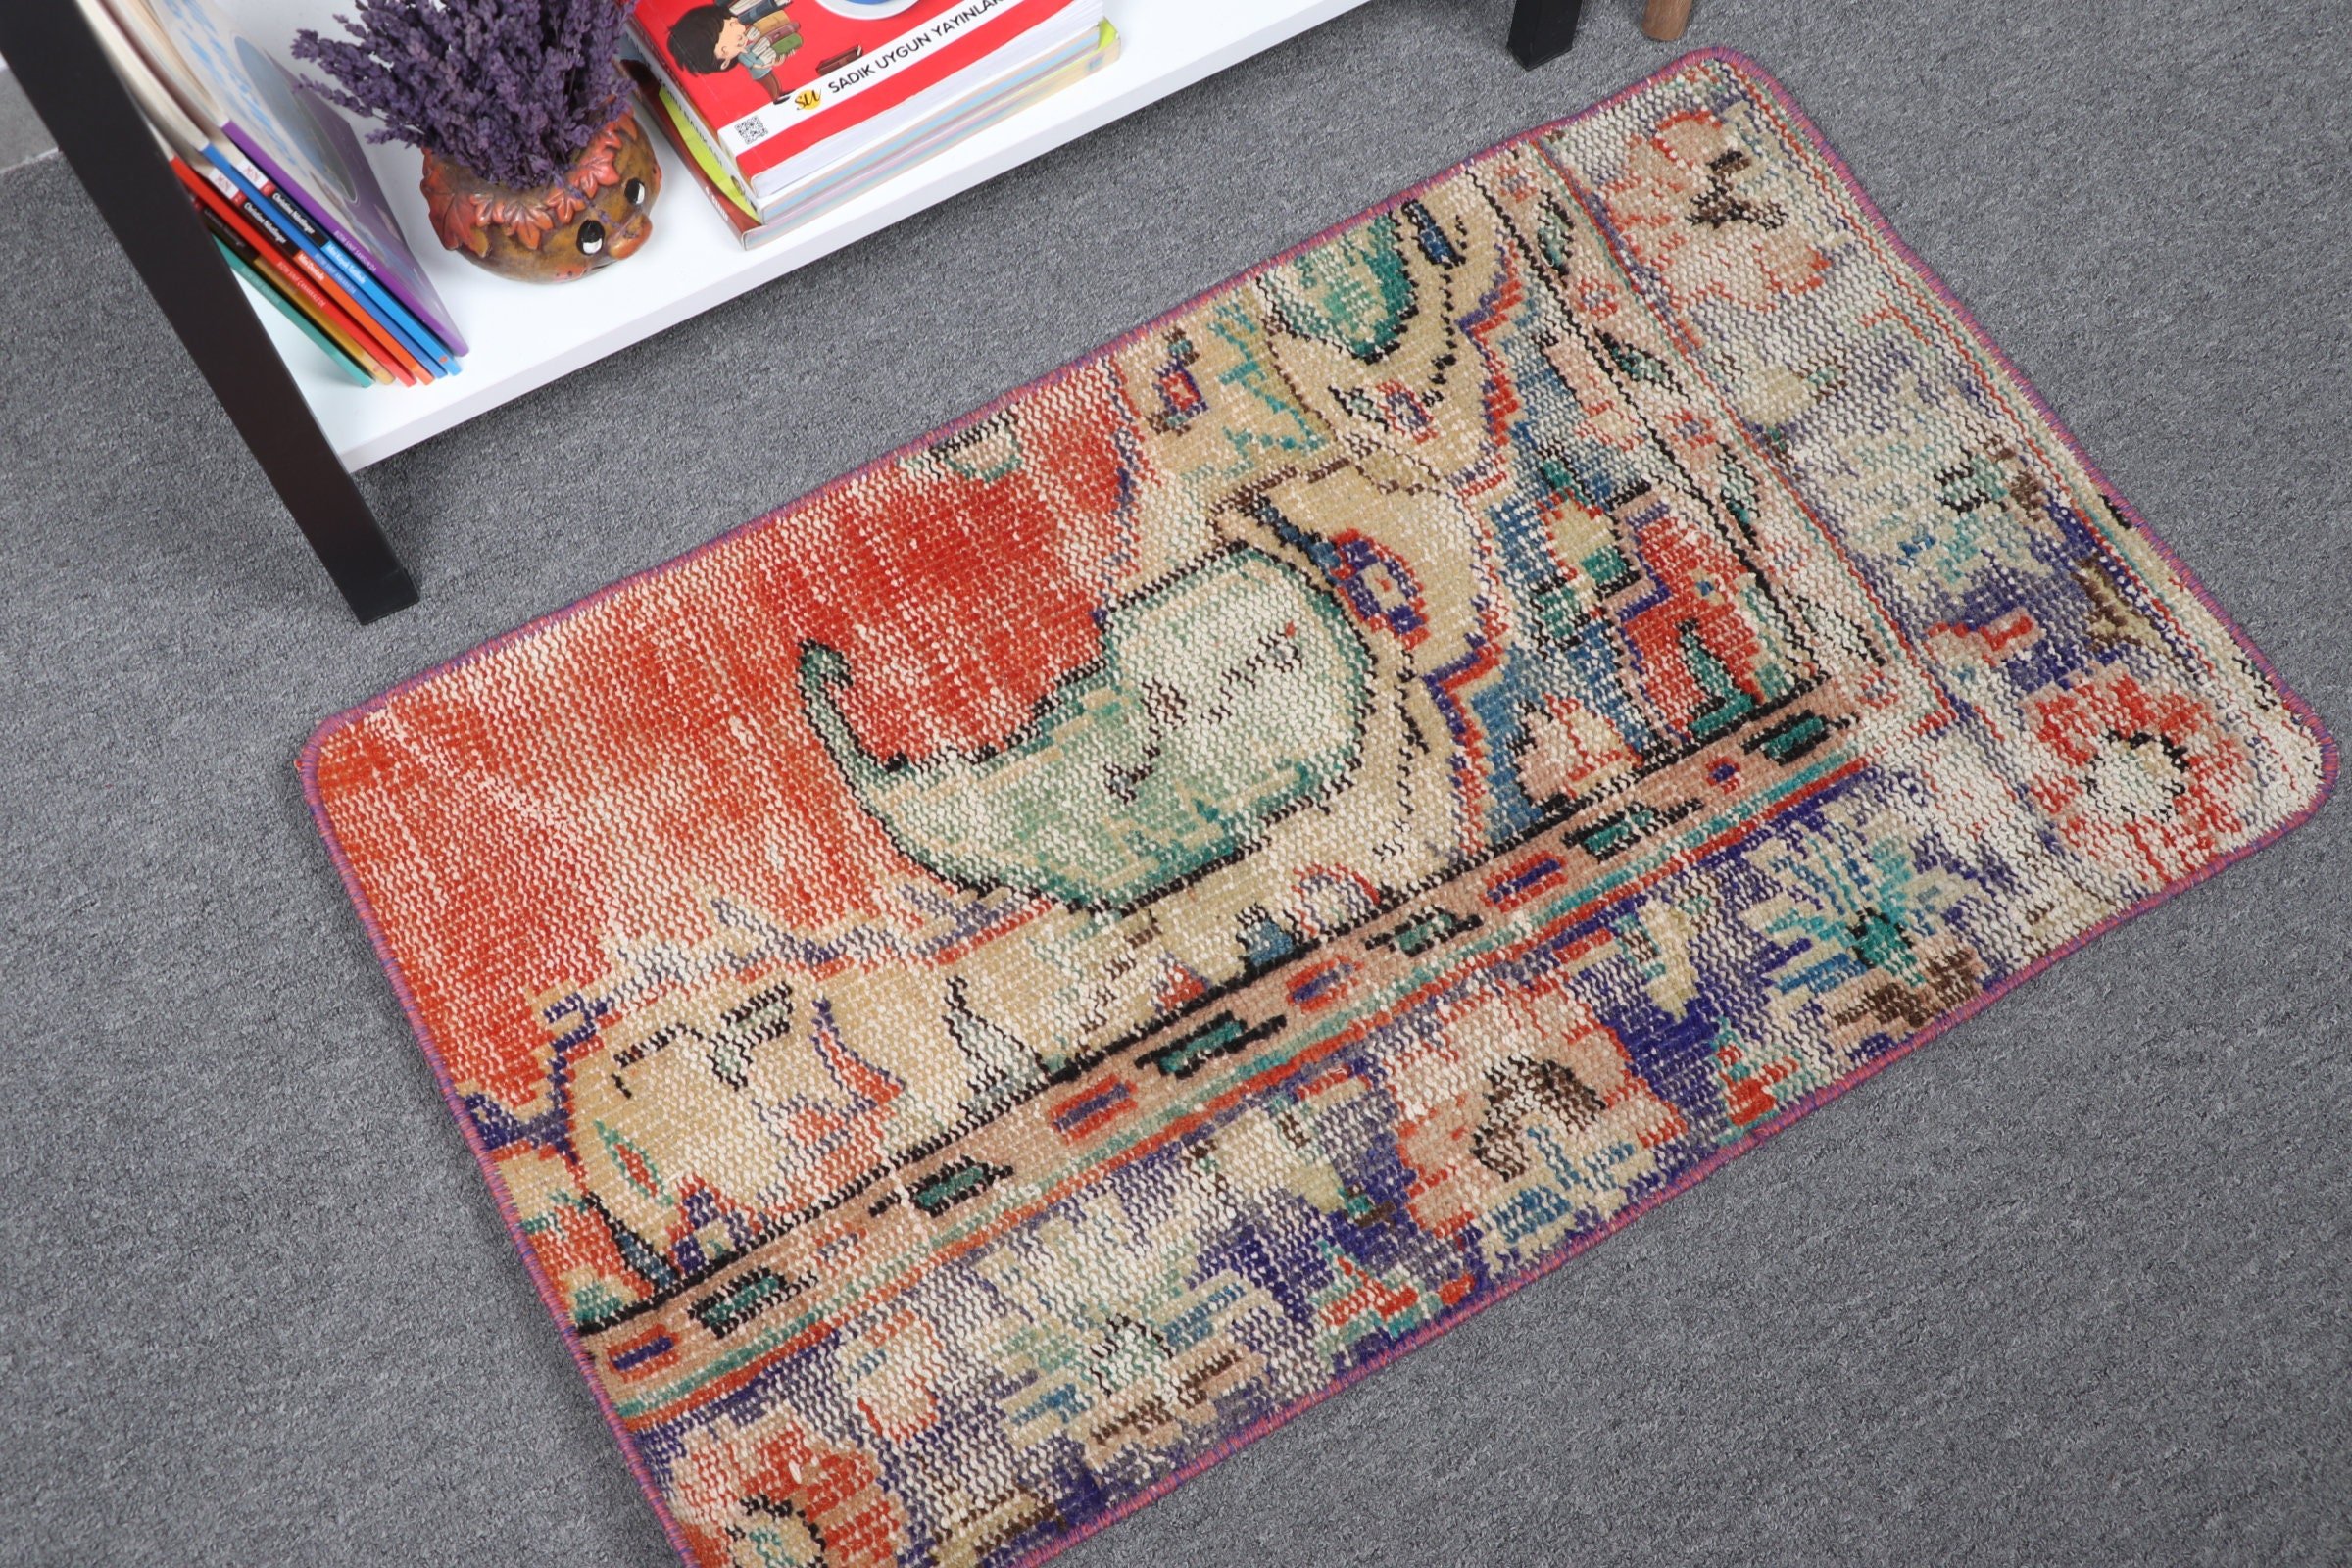 Vintage Rug, Entry Rug, Kitchen Rug, Cute Rugs, Turkish Rug, Rugs for Wall Hanging, Antique Rug, Red  1.7x2.9 ft Small Rug